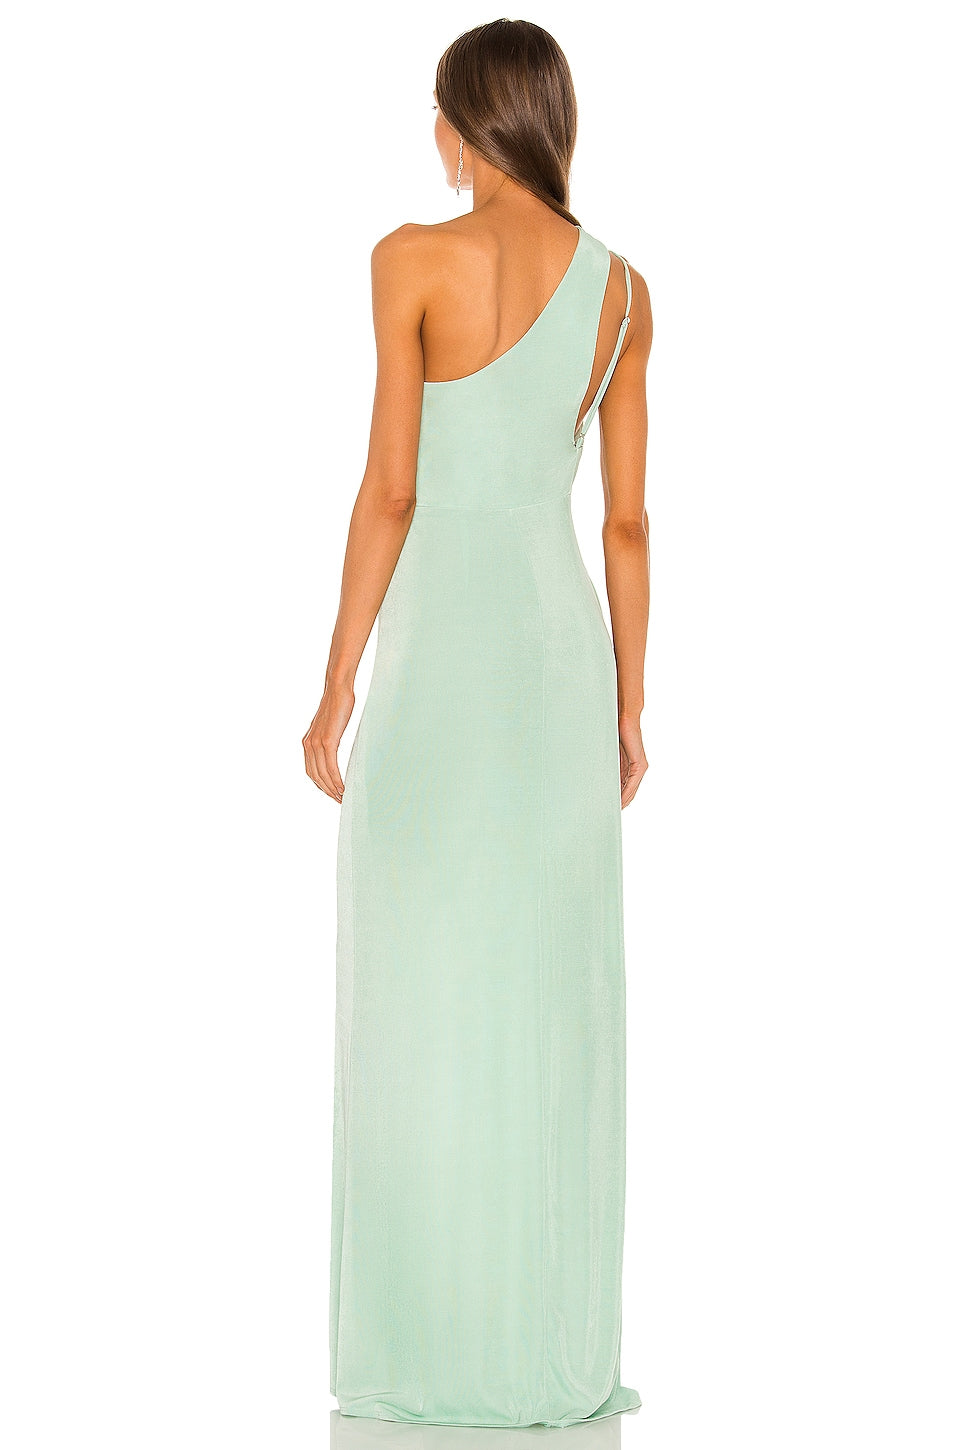 Katie May X REVOLVE A Cut Above Gown in Seagreen SIZE LARGE